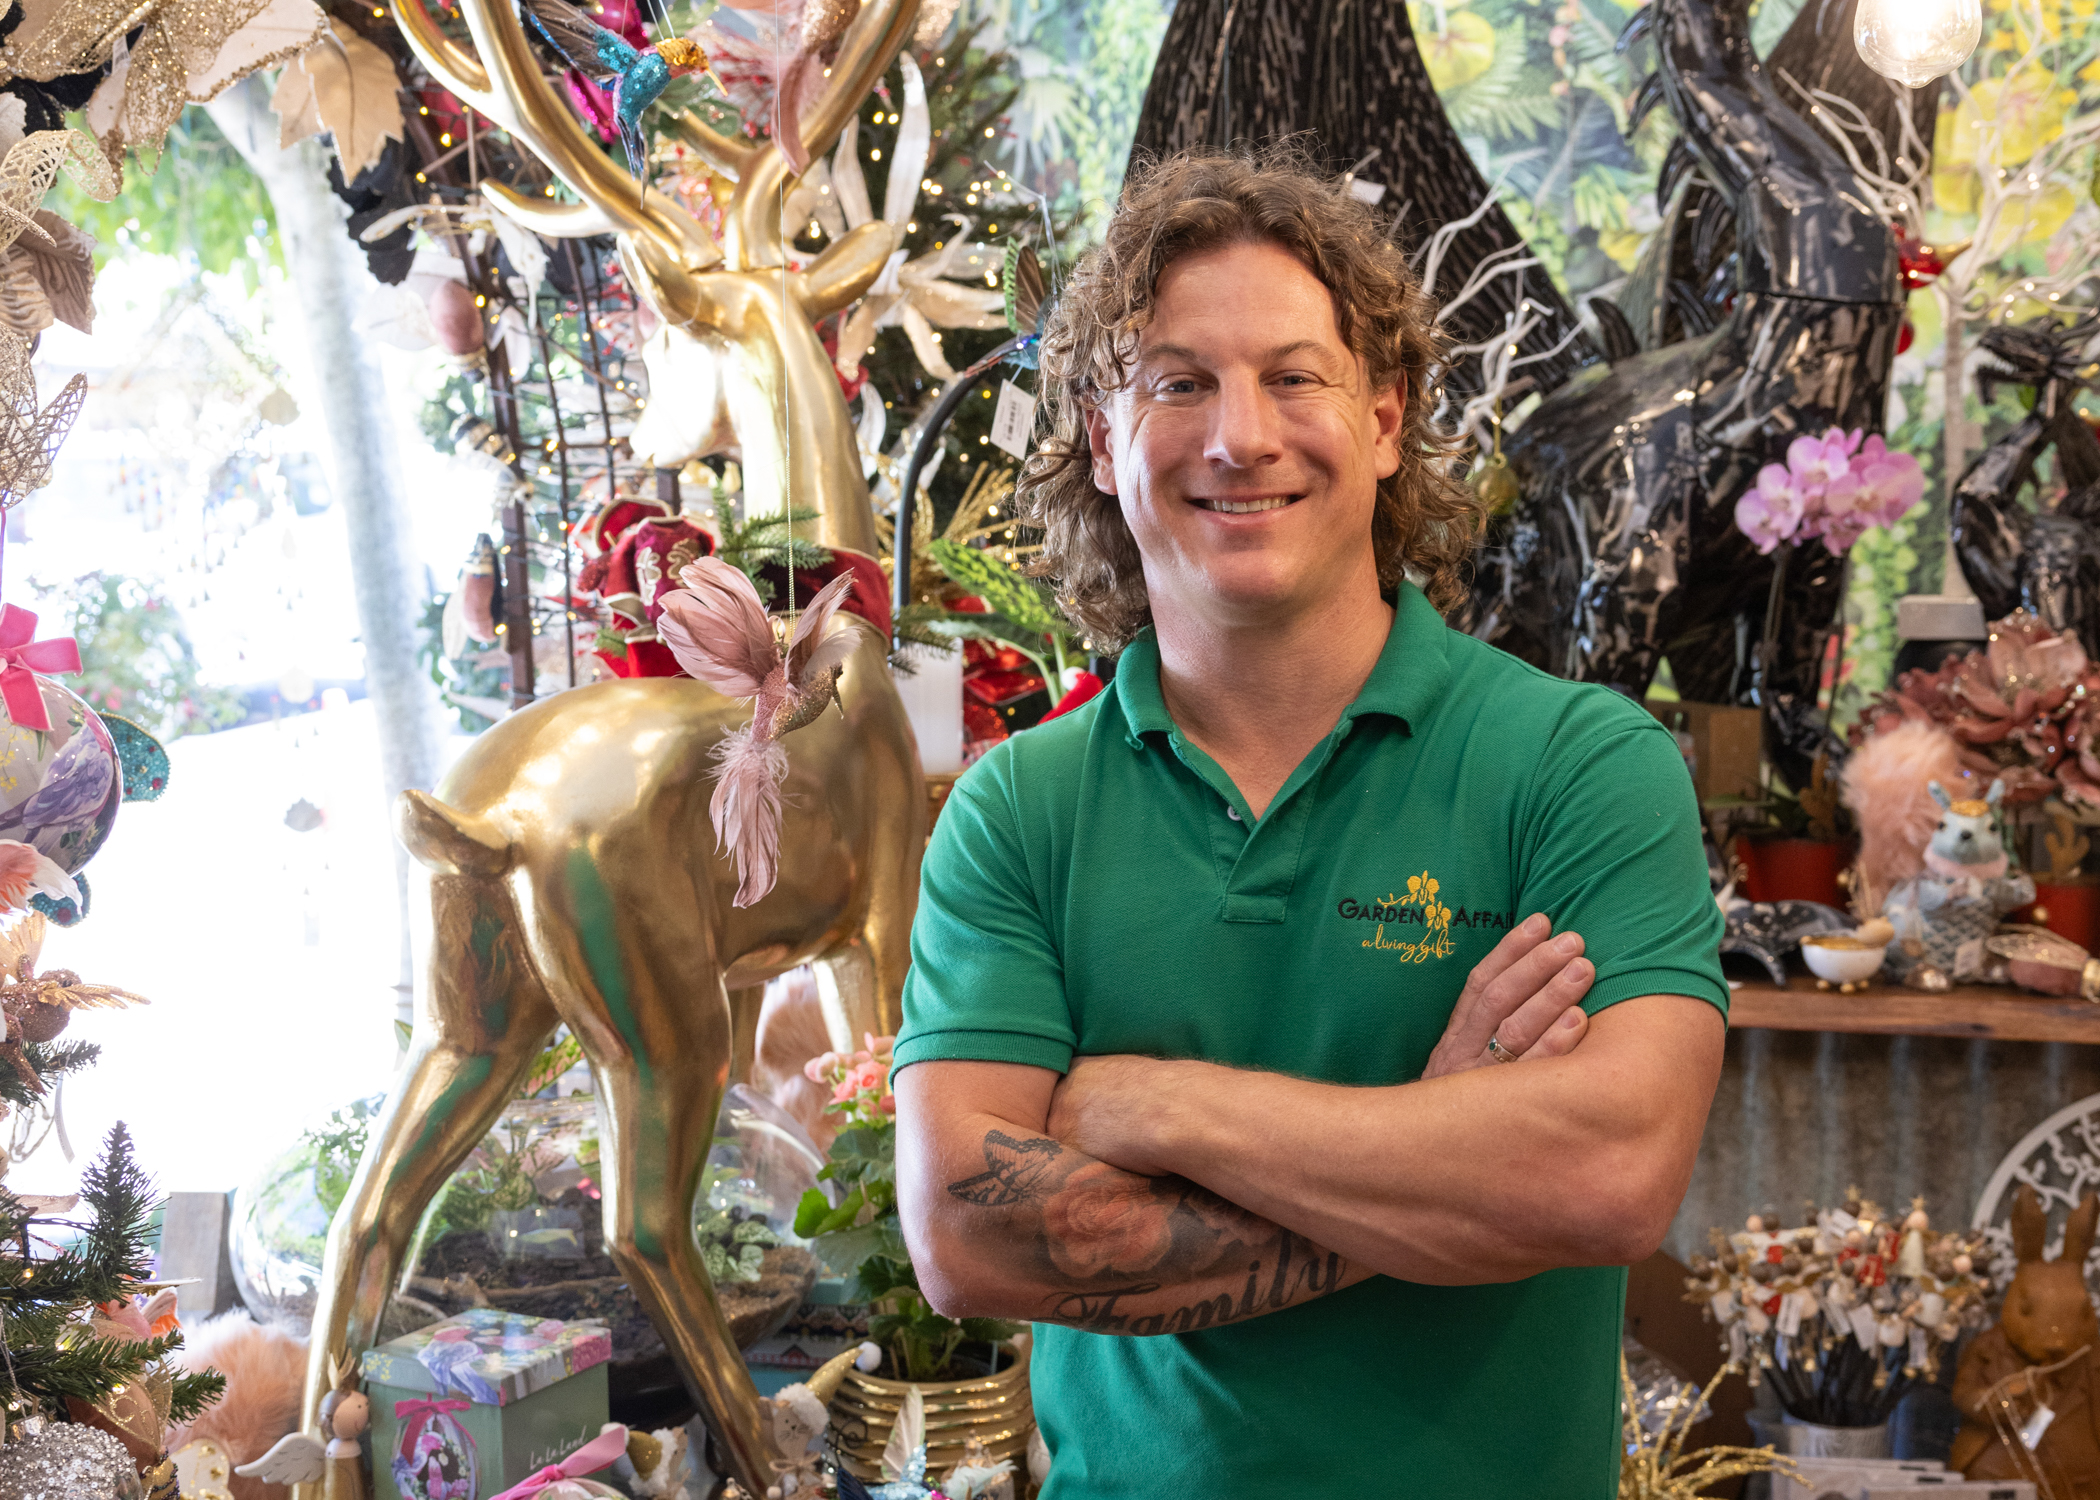 Man stands in gift shop with arms folded smiling at camera